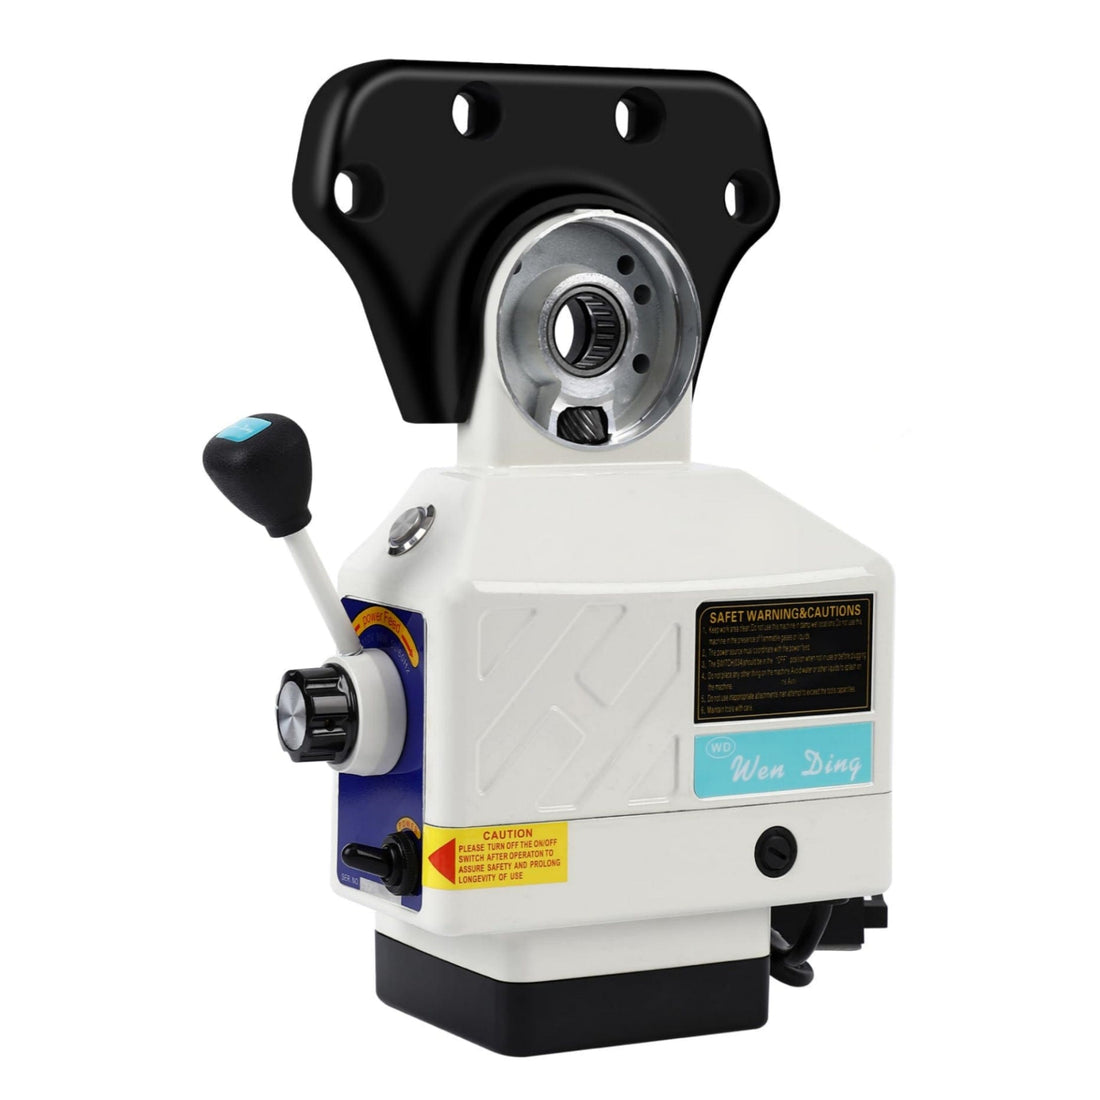 Y-Axis Power Feed for Power Milling Machines Adjustable Speed Table Milling Machine